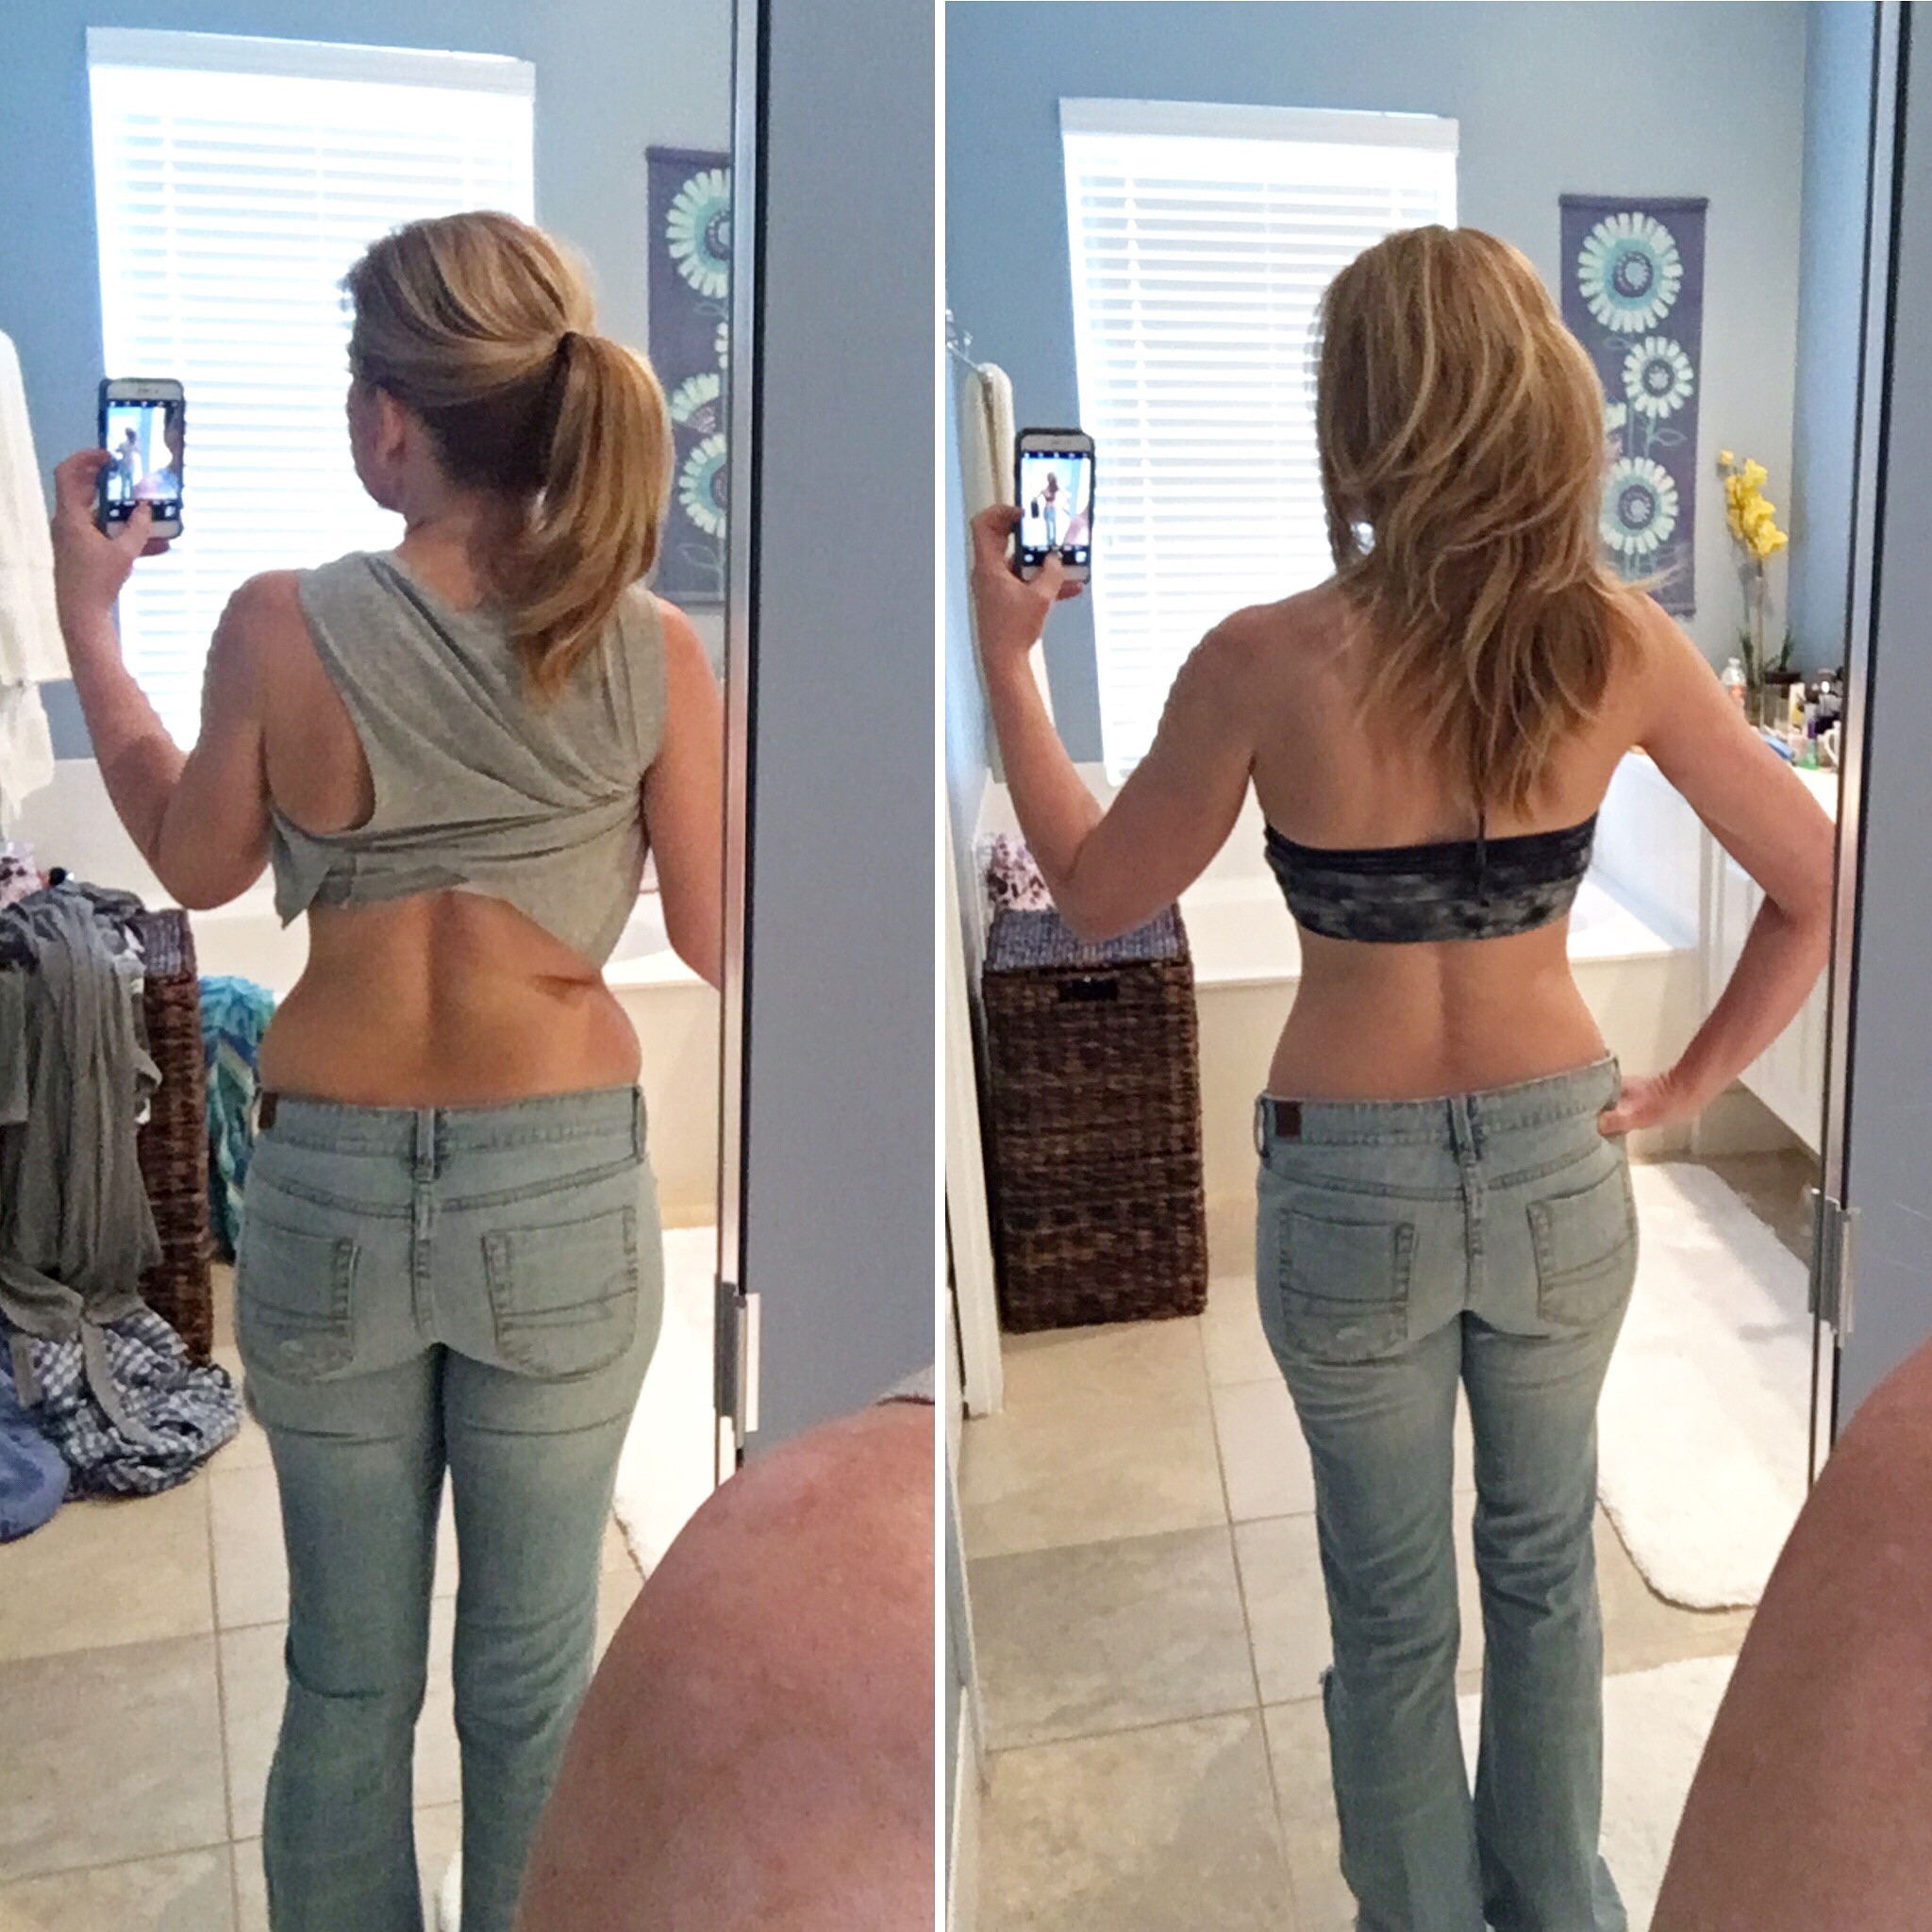 Pruvit Keto OS before and after